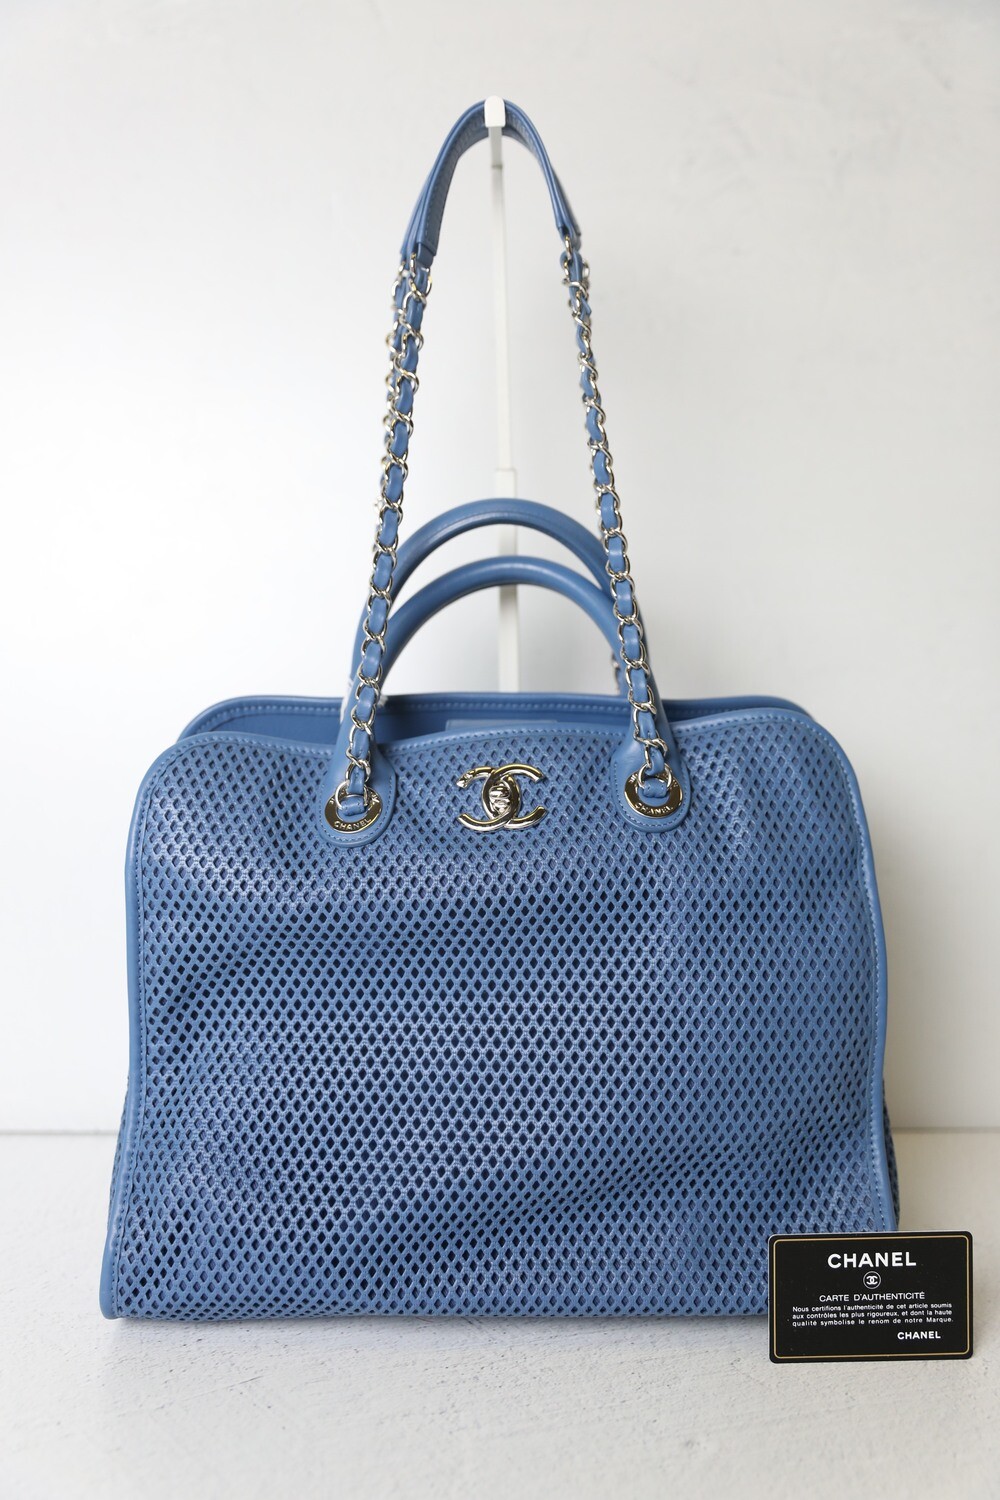 Chanel Up in the Air Perforated Tote, Blue Leather with Silver Hardware,  Preowned No Dustbag WA001